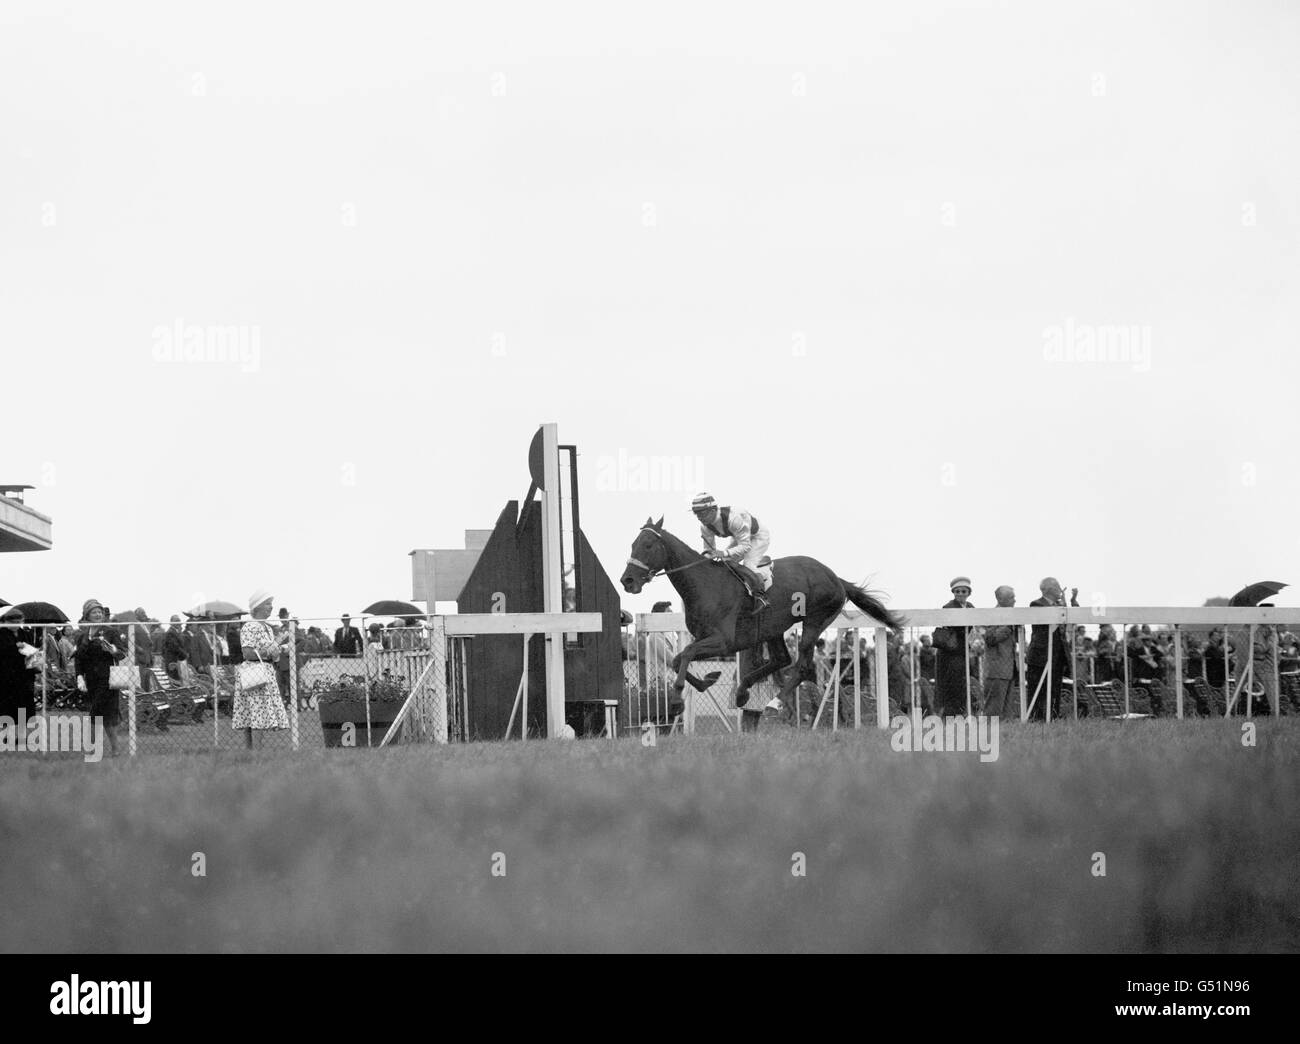 'High Perch' crosses the finishing line to win the Winston Churchill Stakes at Hurst Park. Jockey is Geoff Lewis and the colt is owned by Mr. H. Allen. Stock Photo